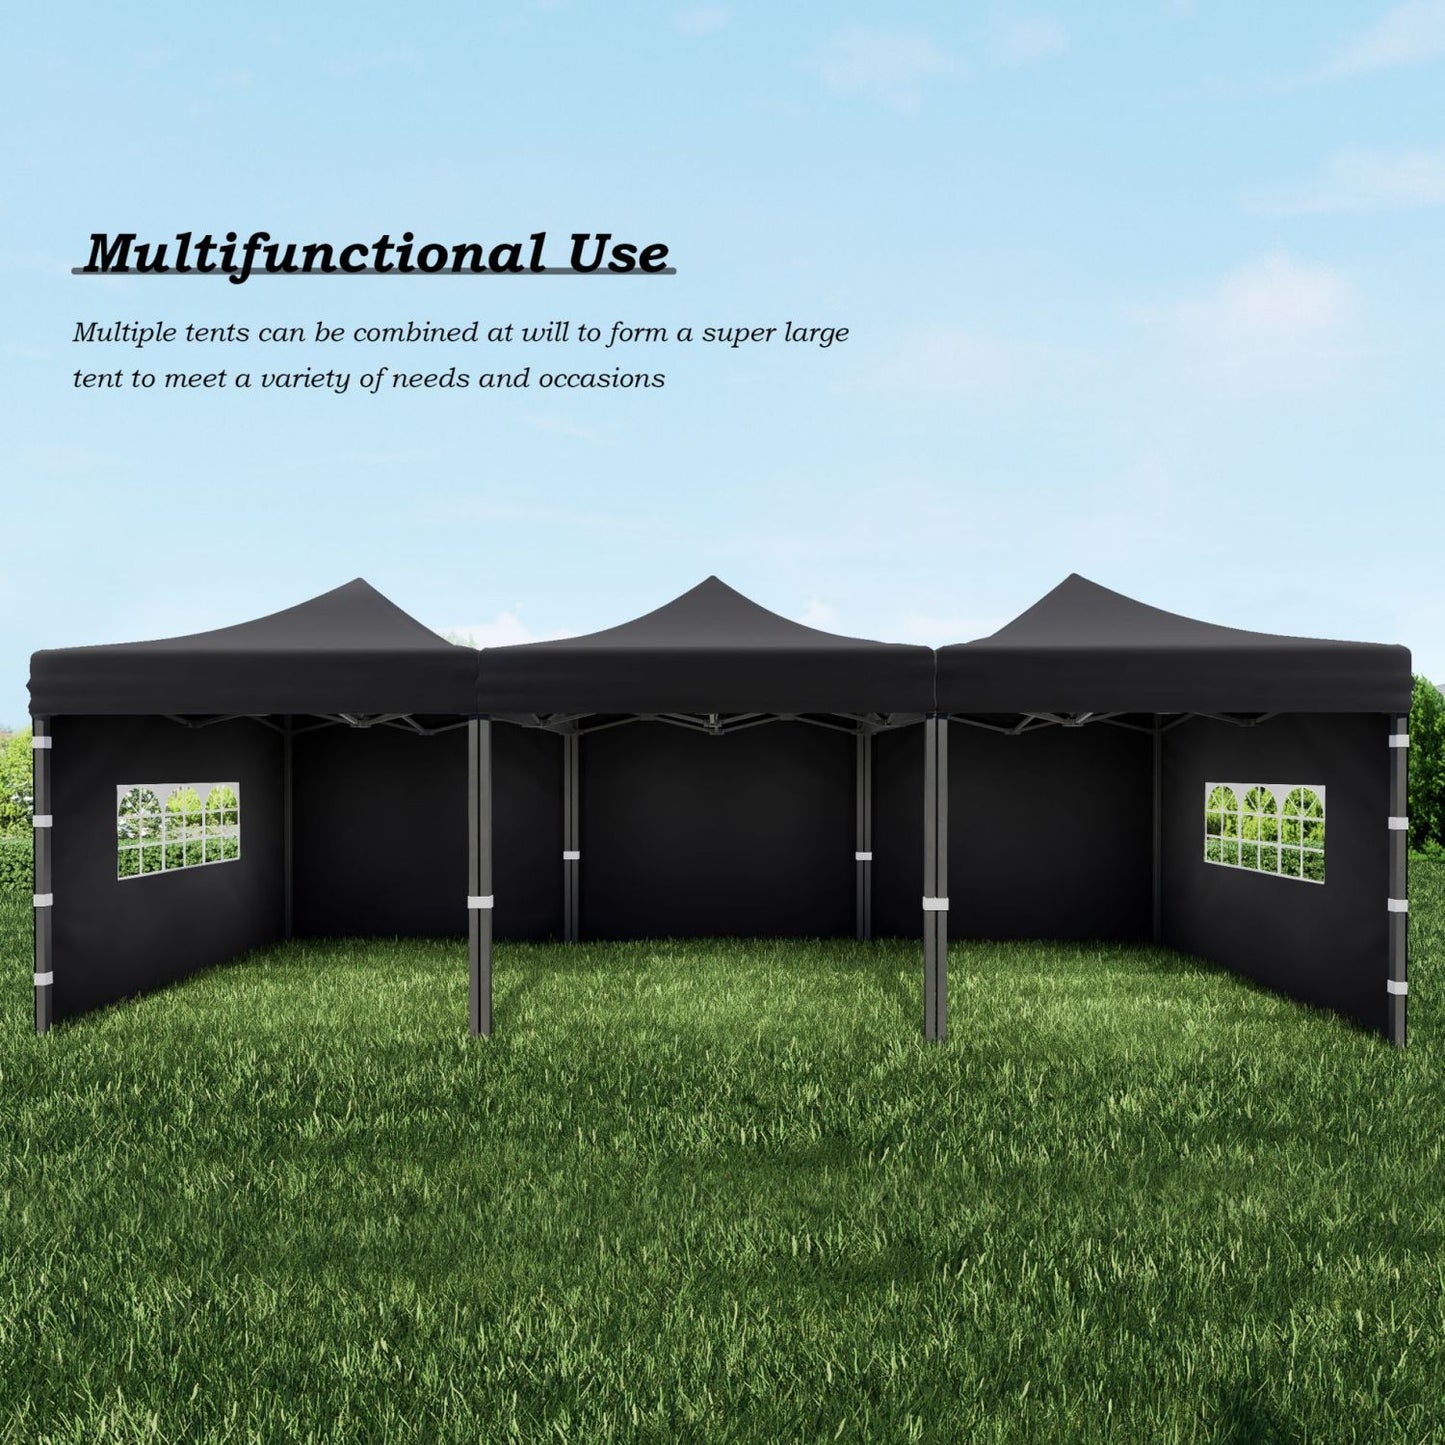 10 x 10 FT. Pop Up Canopy Tent with Windows Sidewalls, 3 Adjustable Heights, with Wheeled Bag